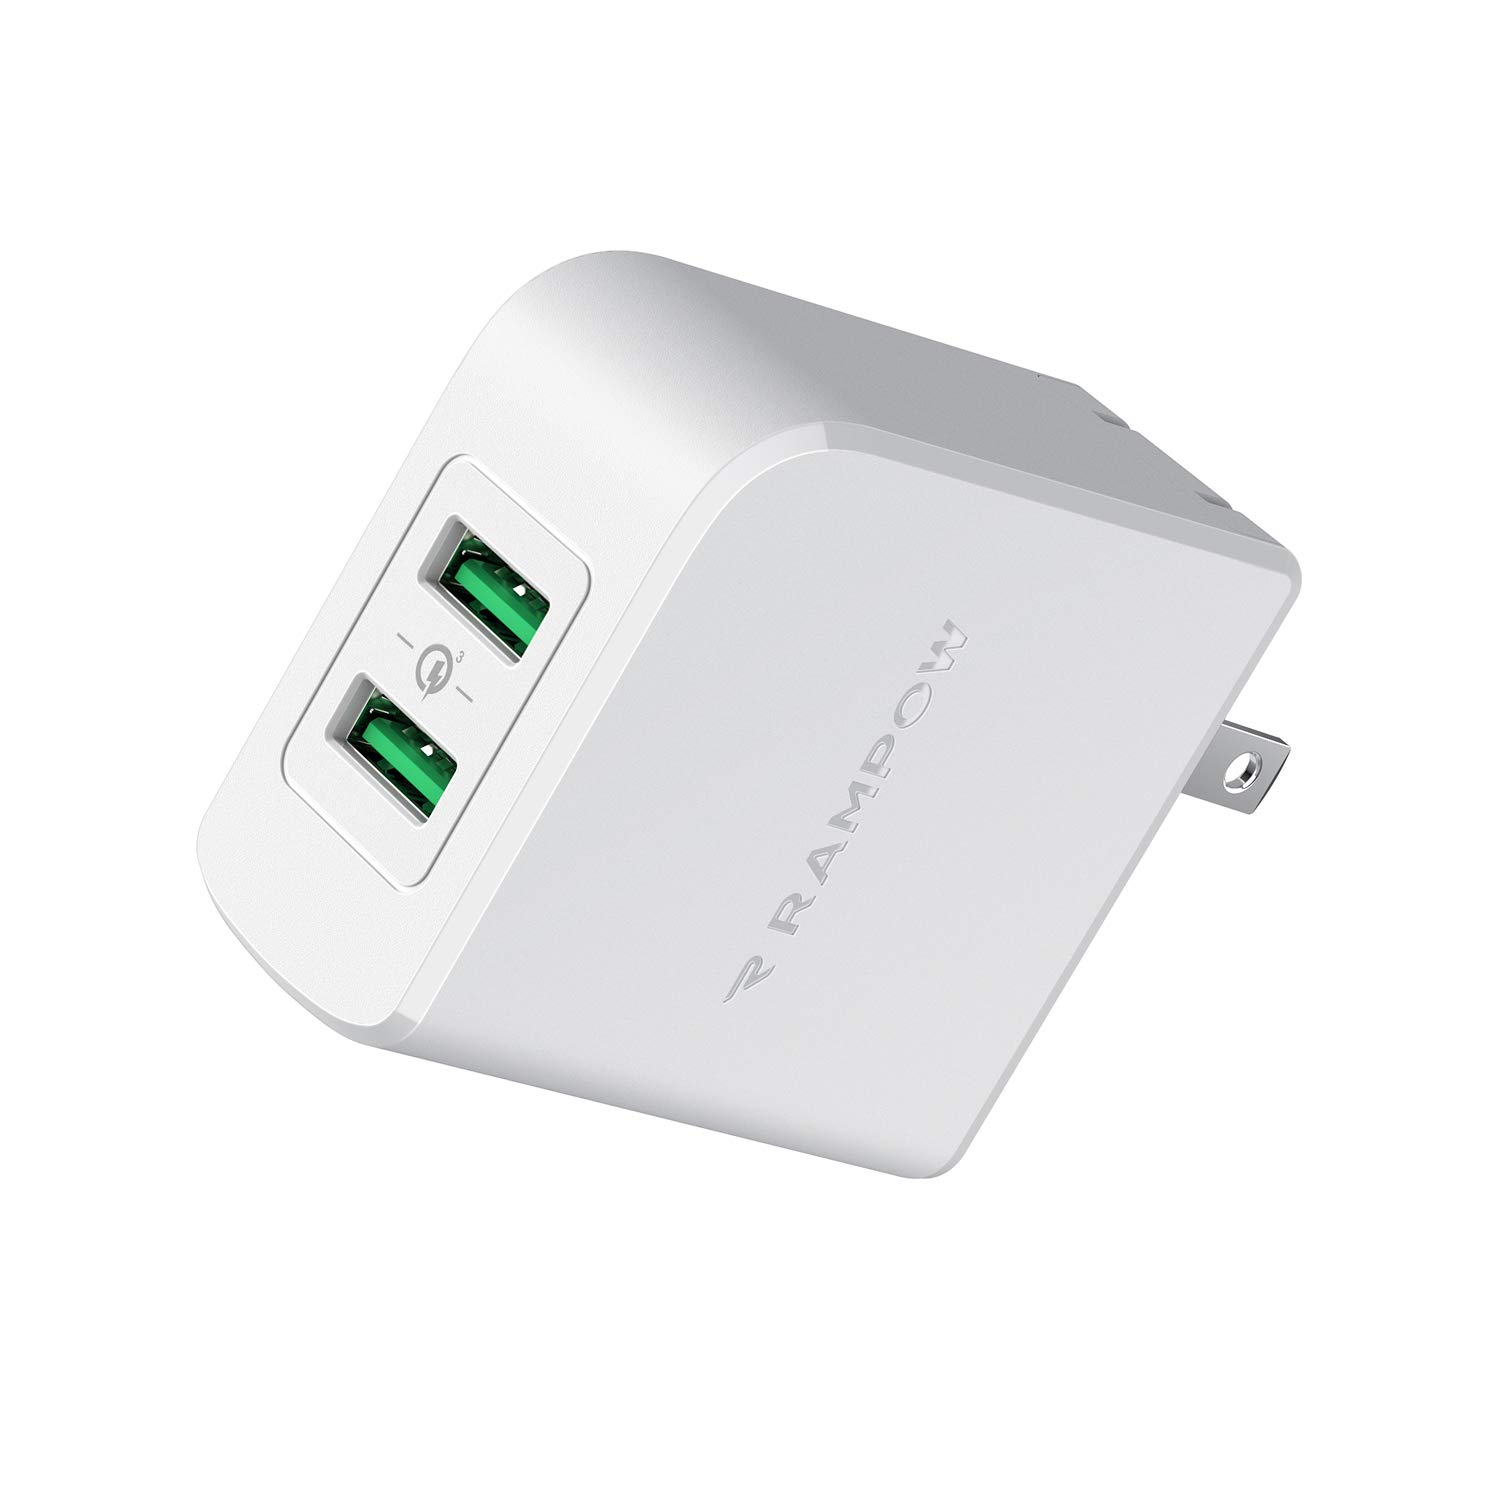 Rampow USB急速充電器 android 充電器【39W/QC 3.0対応/2ポート/PSE認証済】usb 充電器 折りたたみ式プラグ搭載 iPhone/iPad/Galaxy S9/ Xperia XZ1 その他Android各種対応 充電アダプター iphone 充電器 海外旅行(ホワイト)